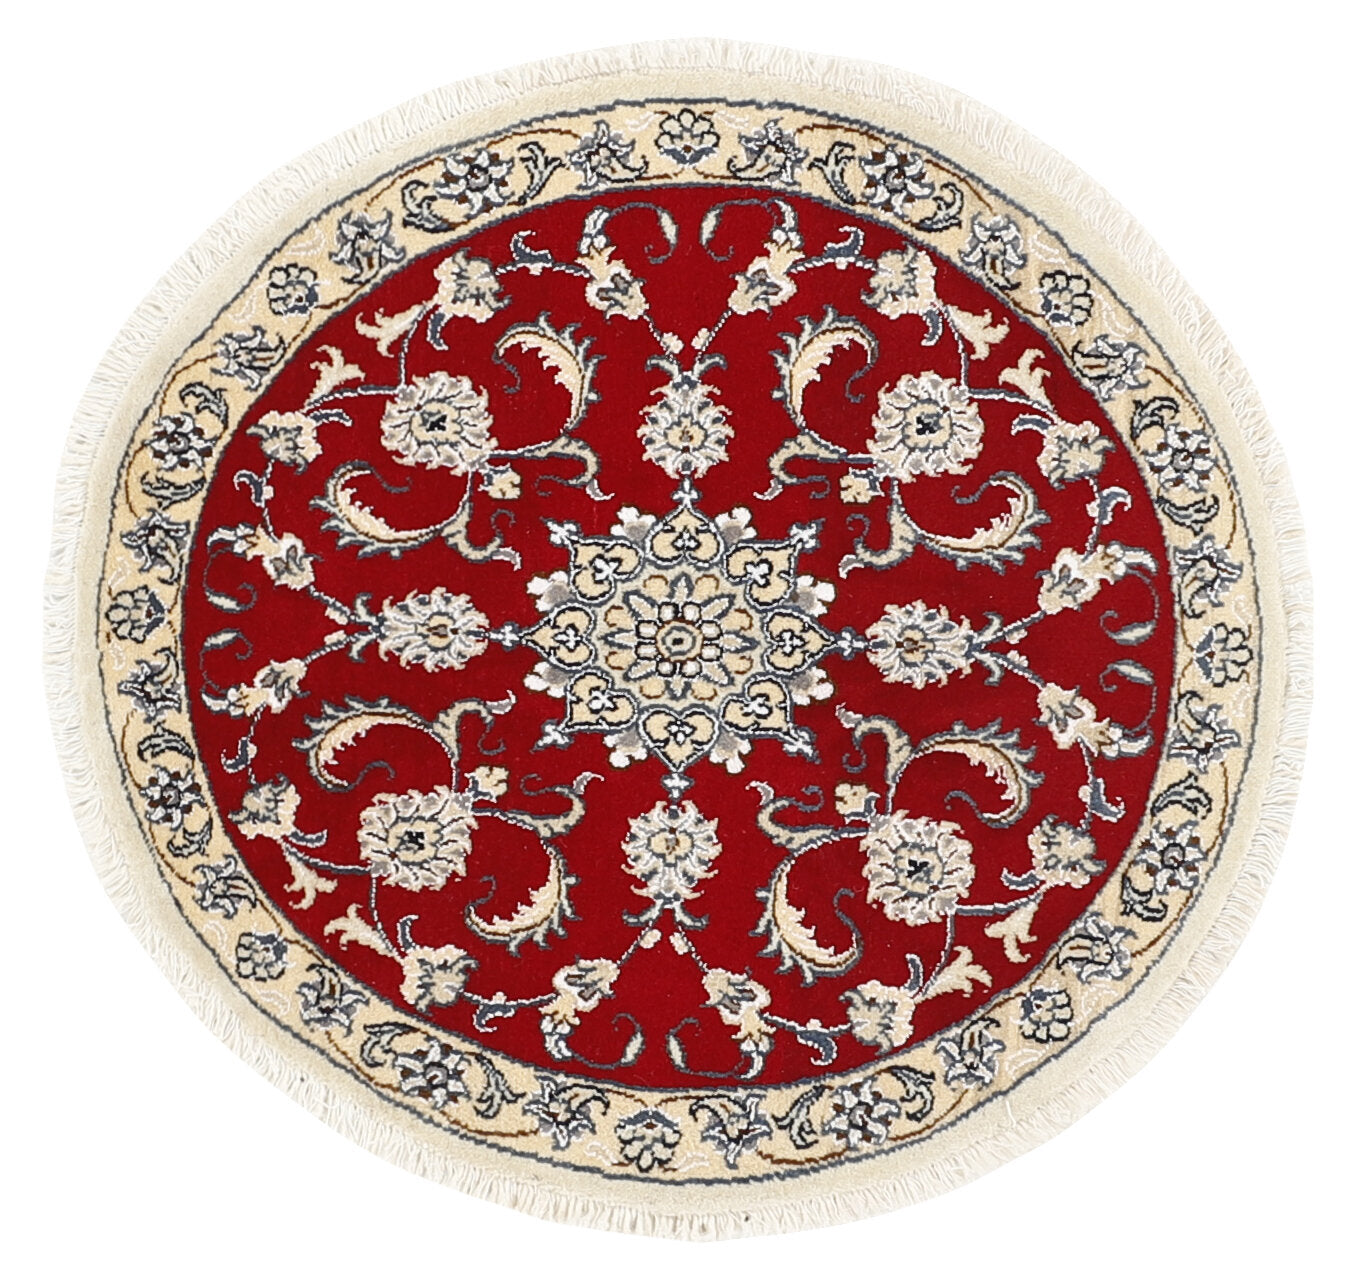 Authentic persian circle rug with a traditional floral design in cream and red